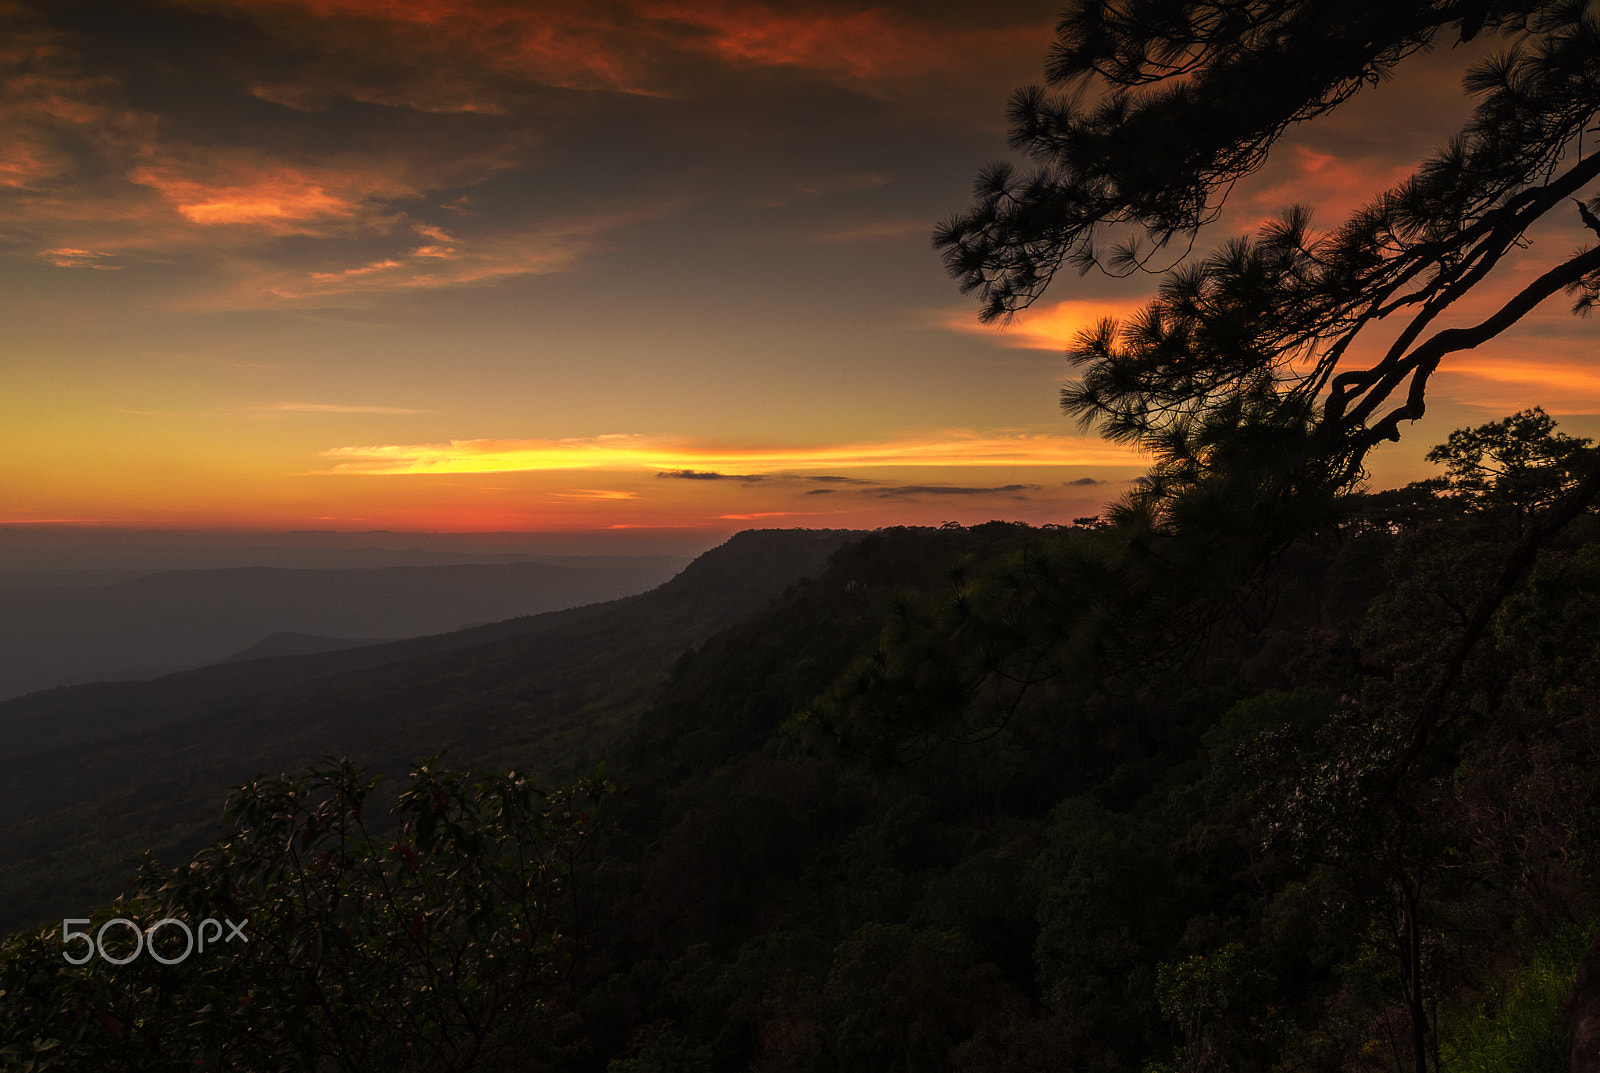 Nikon D5200 + Sigma 17-70mm F2.8-4 DC Macro OS HSM | C sample photo. Sunset cliff and pine branches. photography